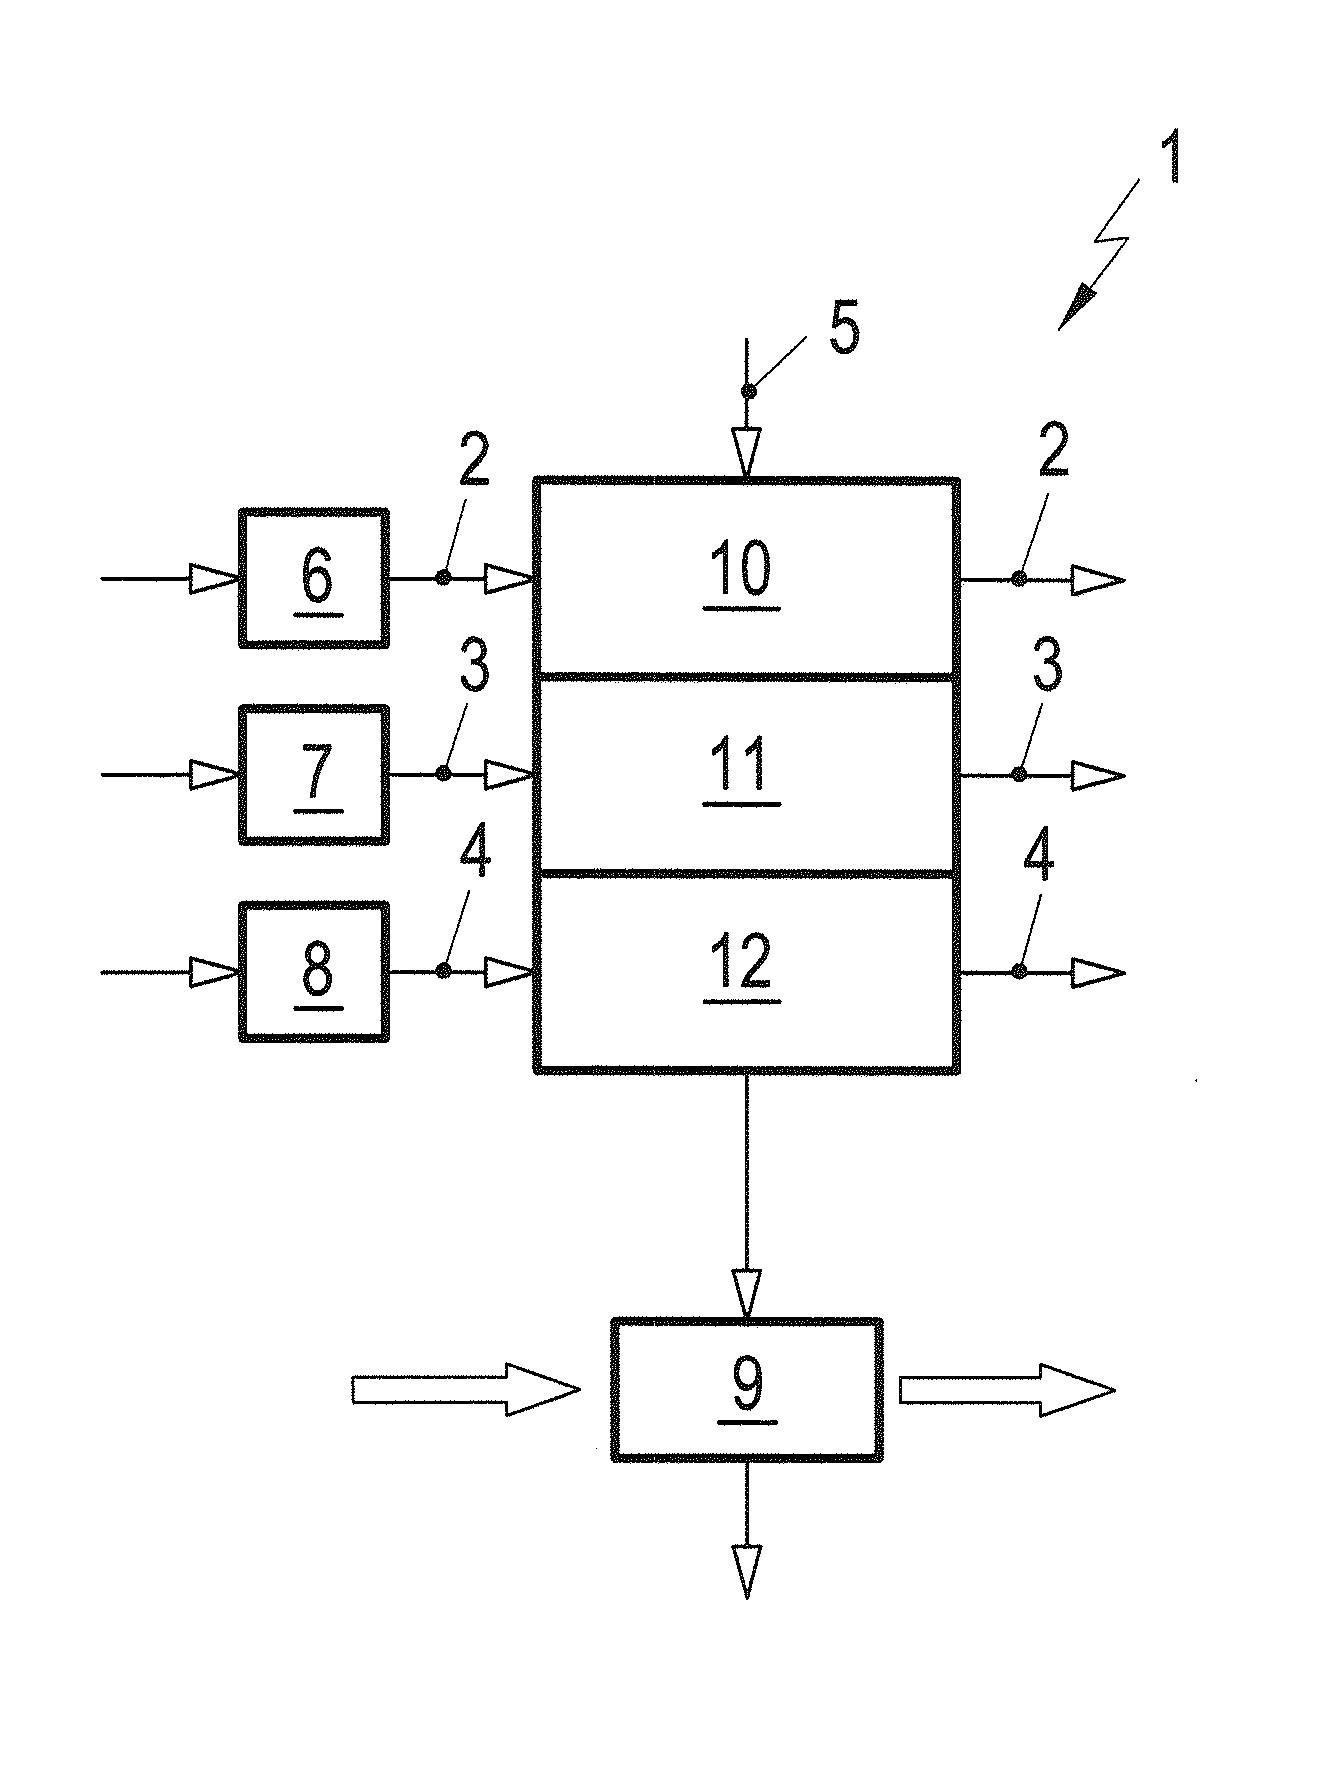 Arrangement of a thermoelectric heat pump